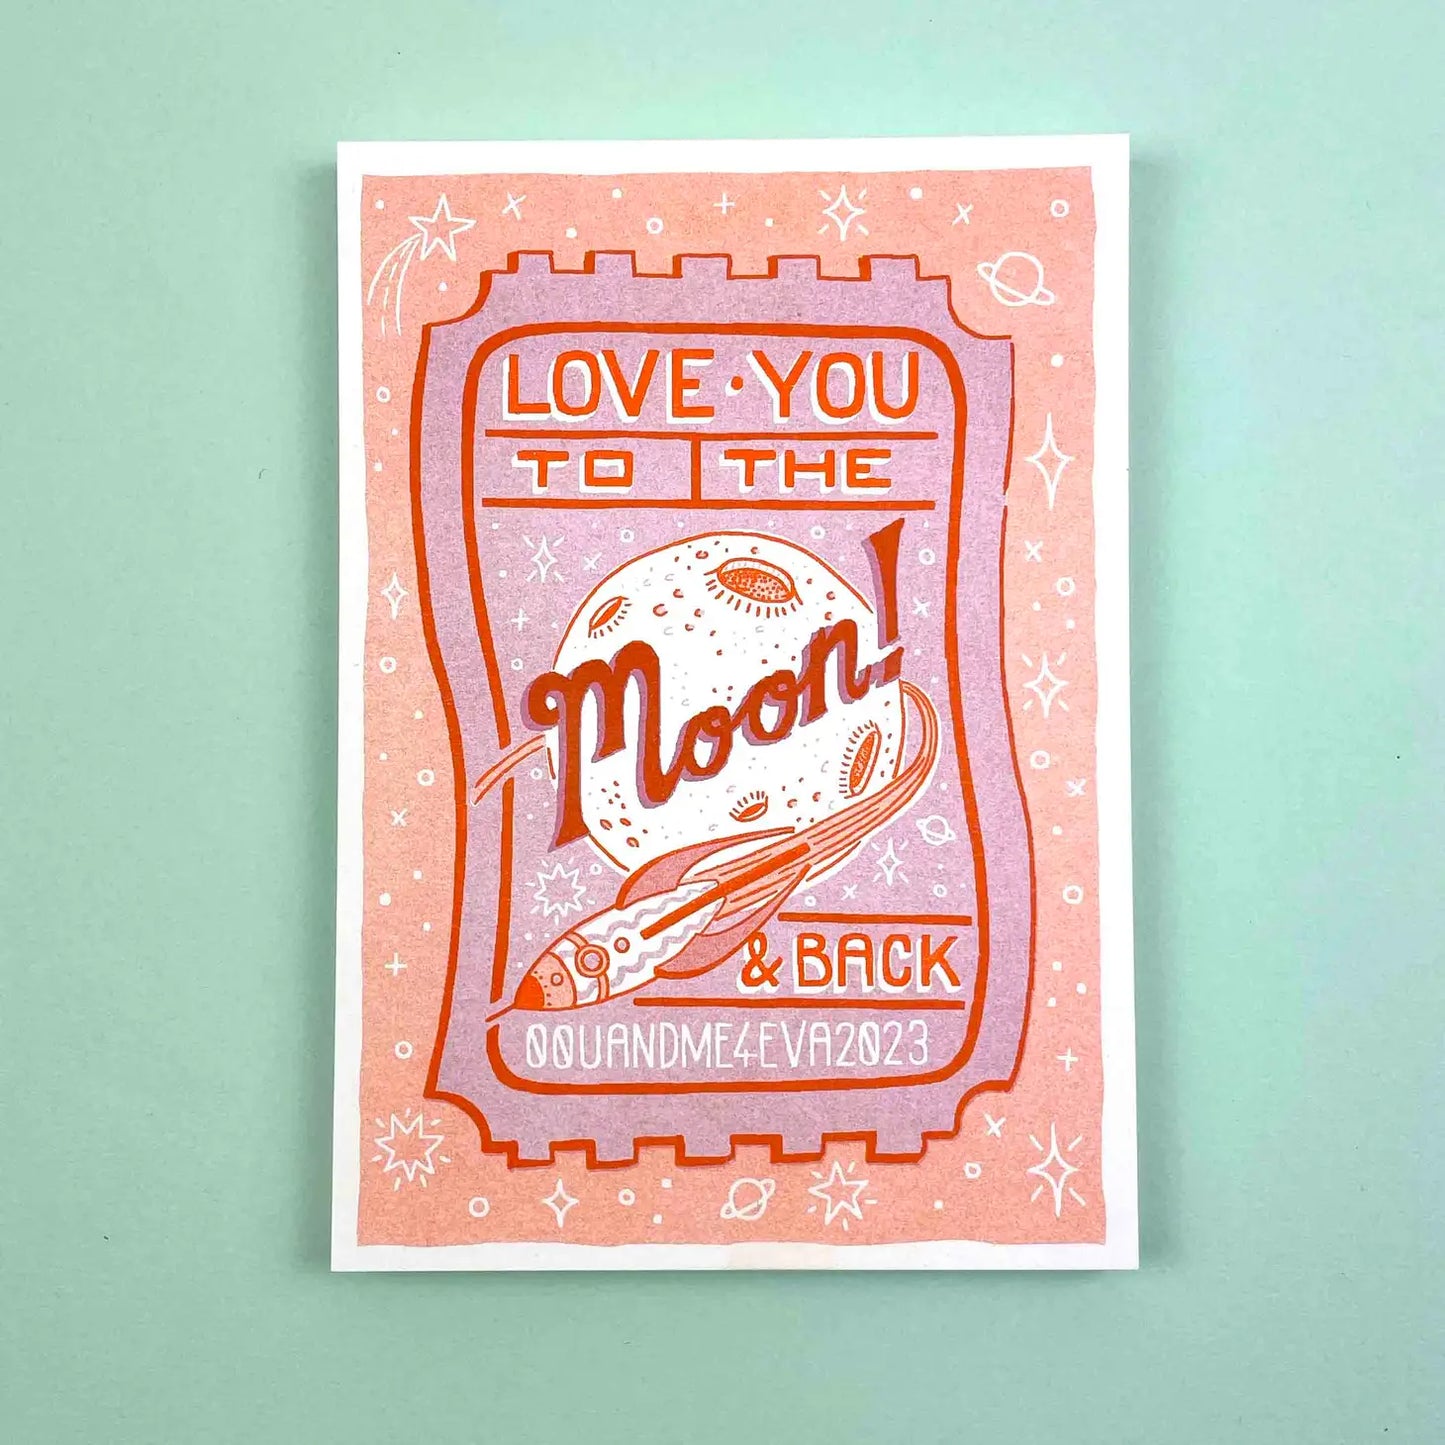 To the moon and back A5 riso print